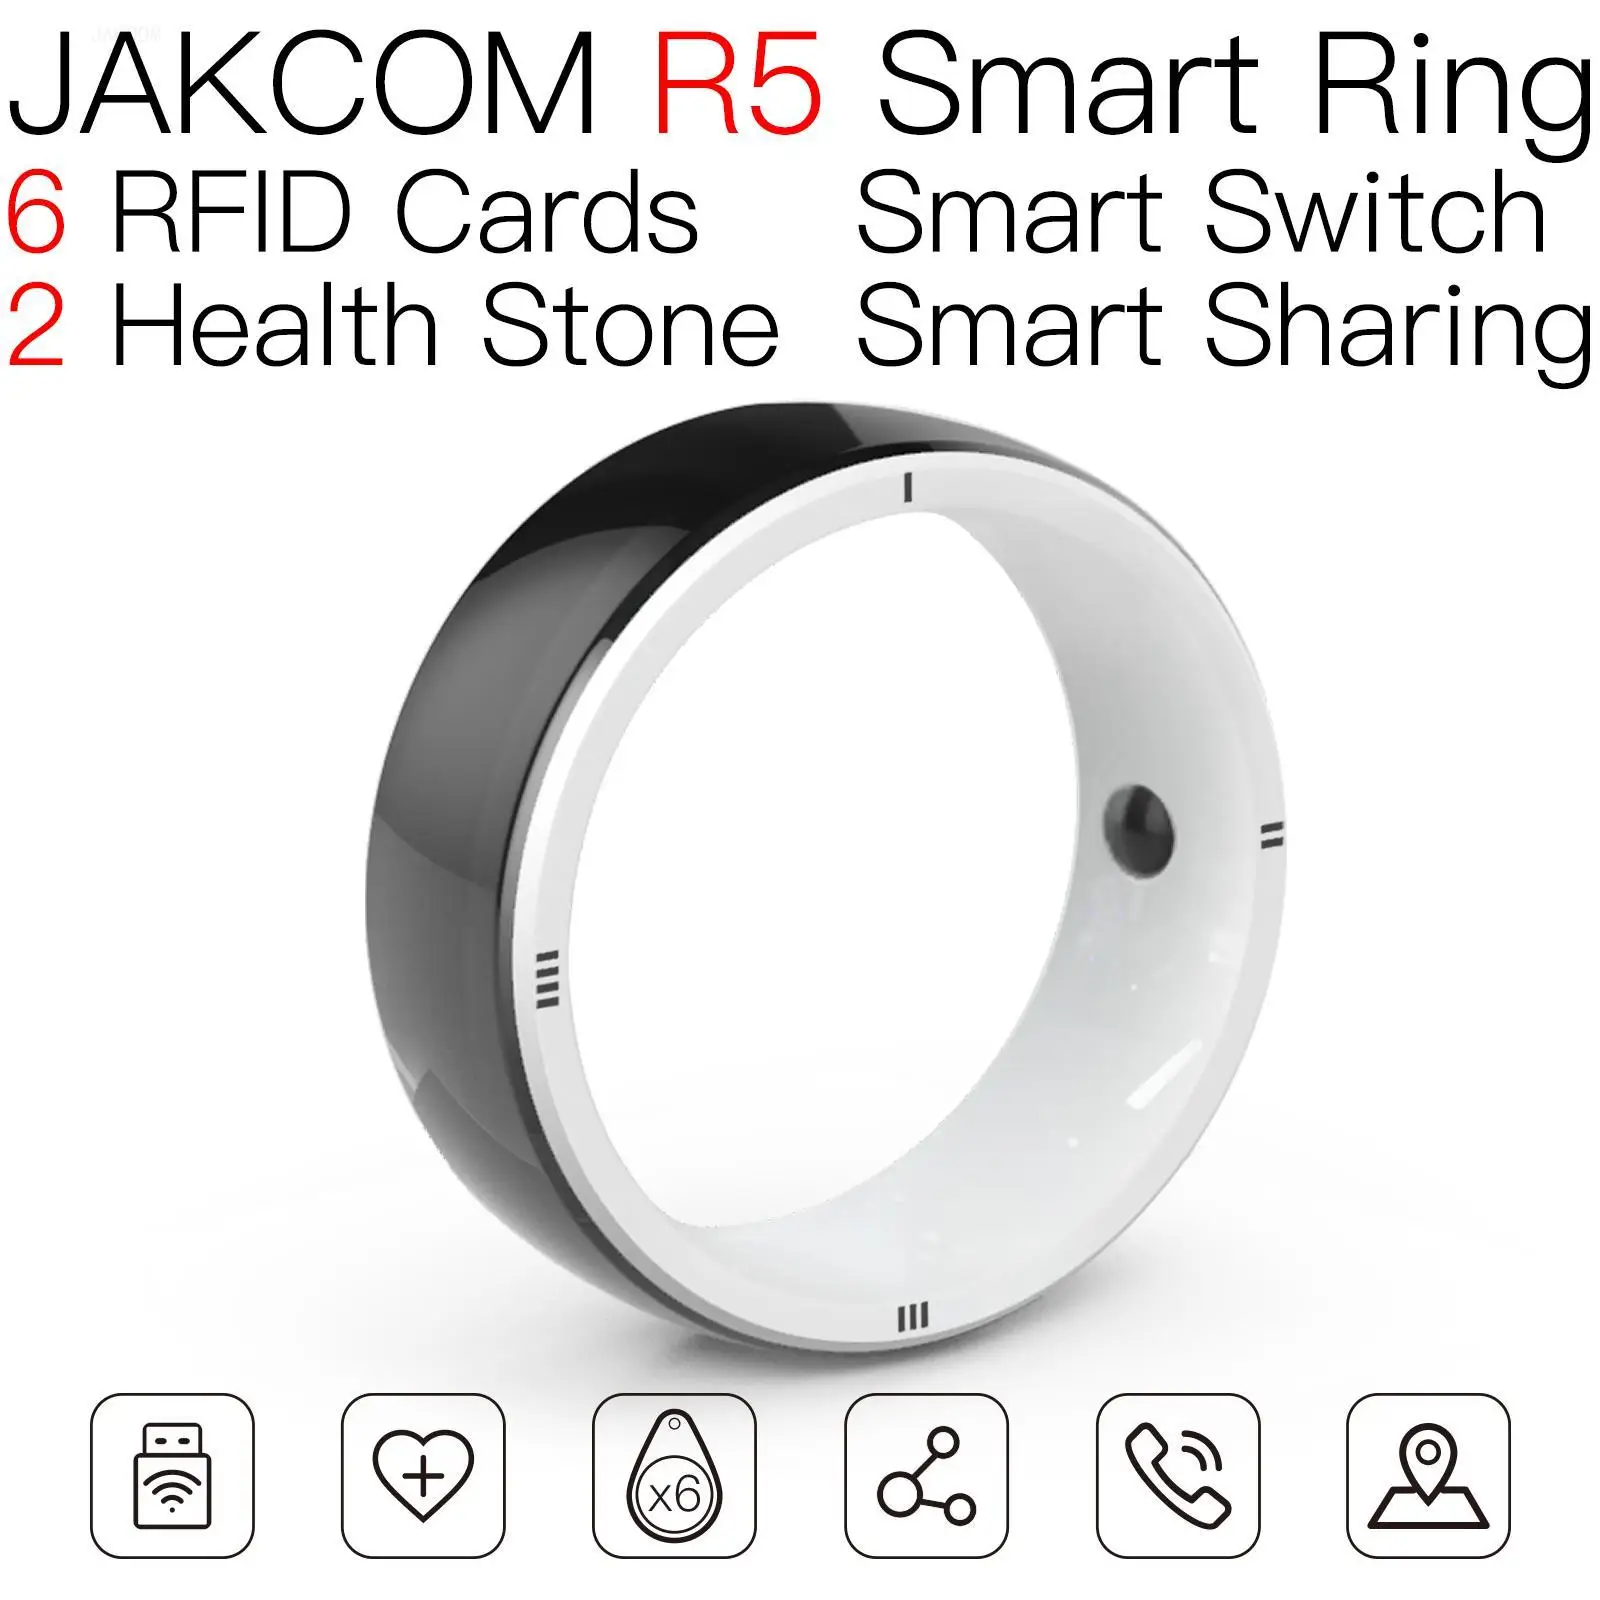 

JAKCOM R5 Smart Ring For men women rfid tag anti metal nfc 4 chip in one amibo switch olt epon 1 pon ncr card